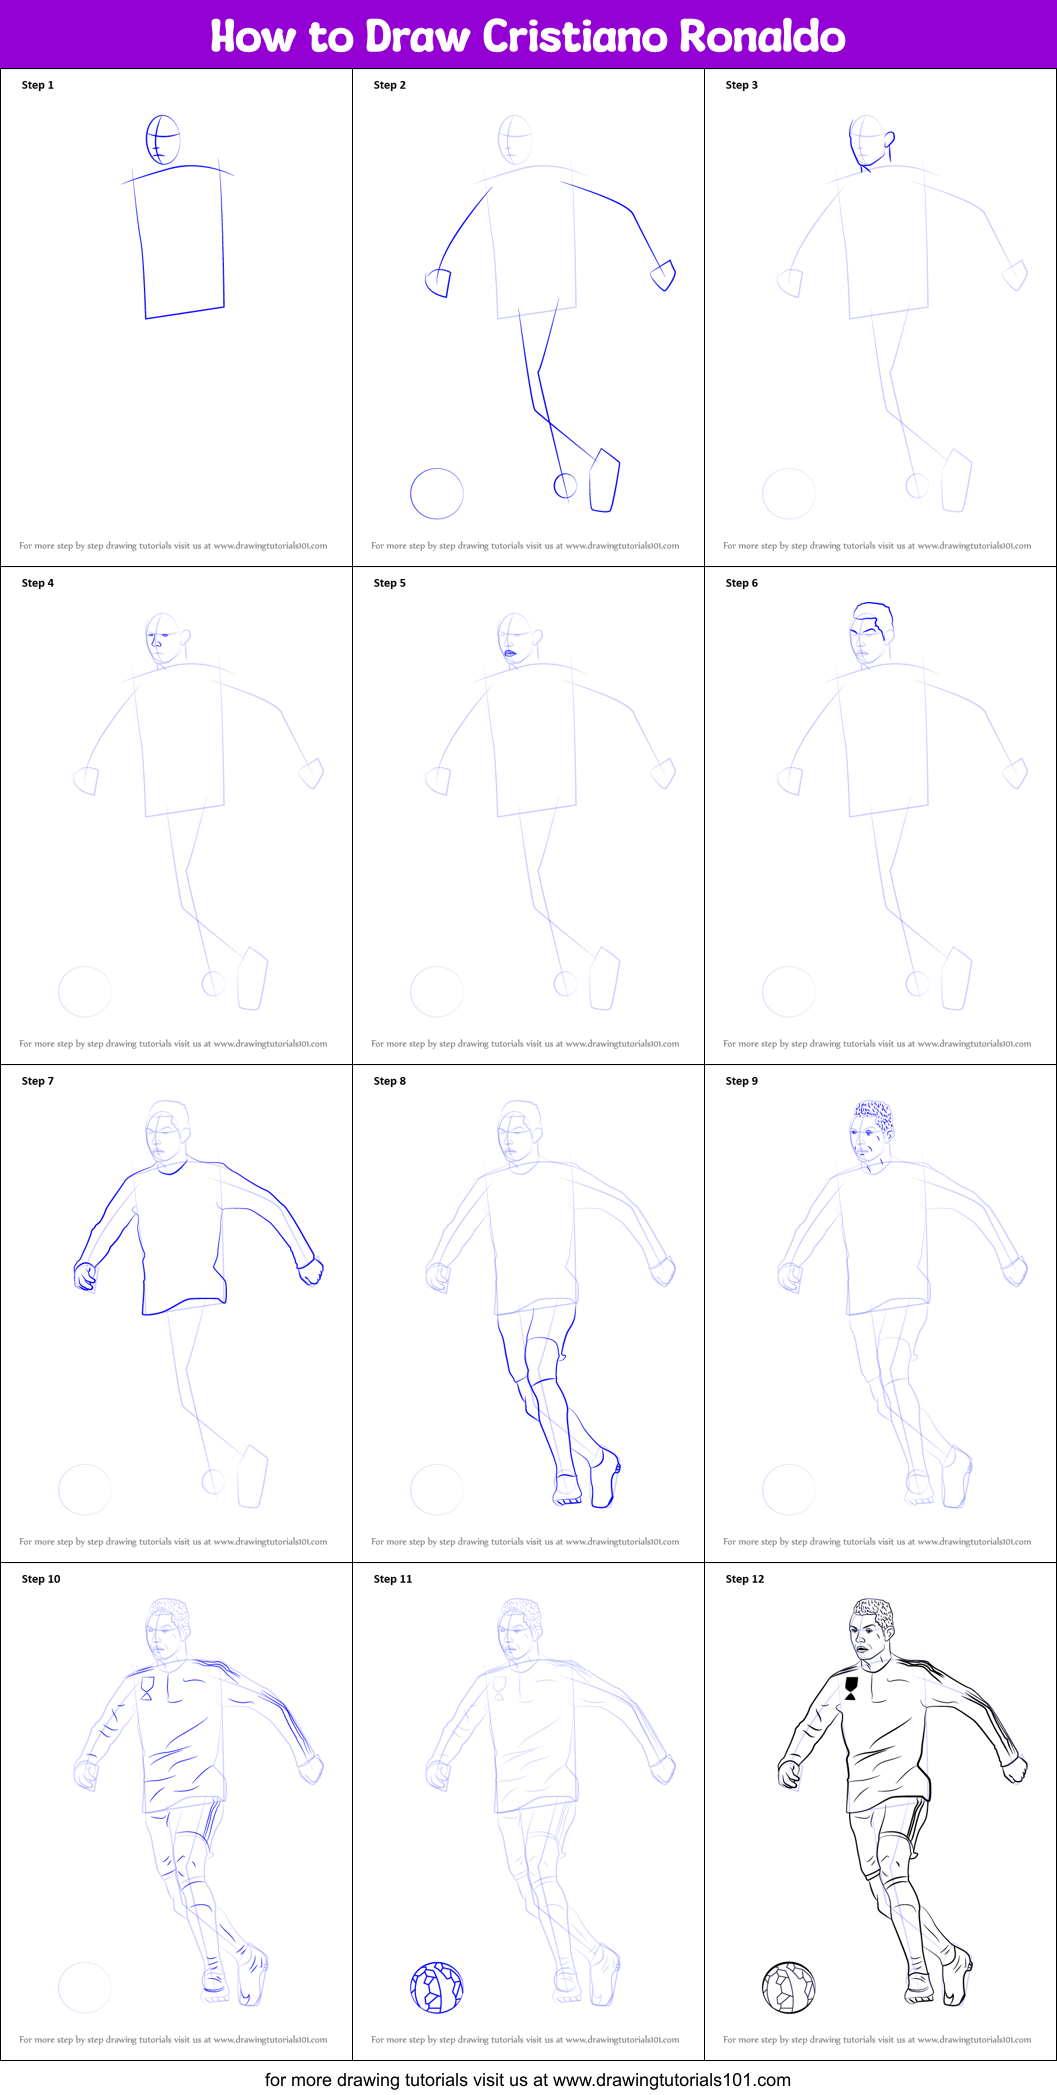 Details 131+ ronaldo drawing step by step latest